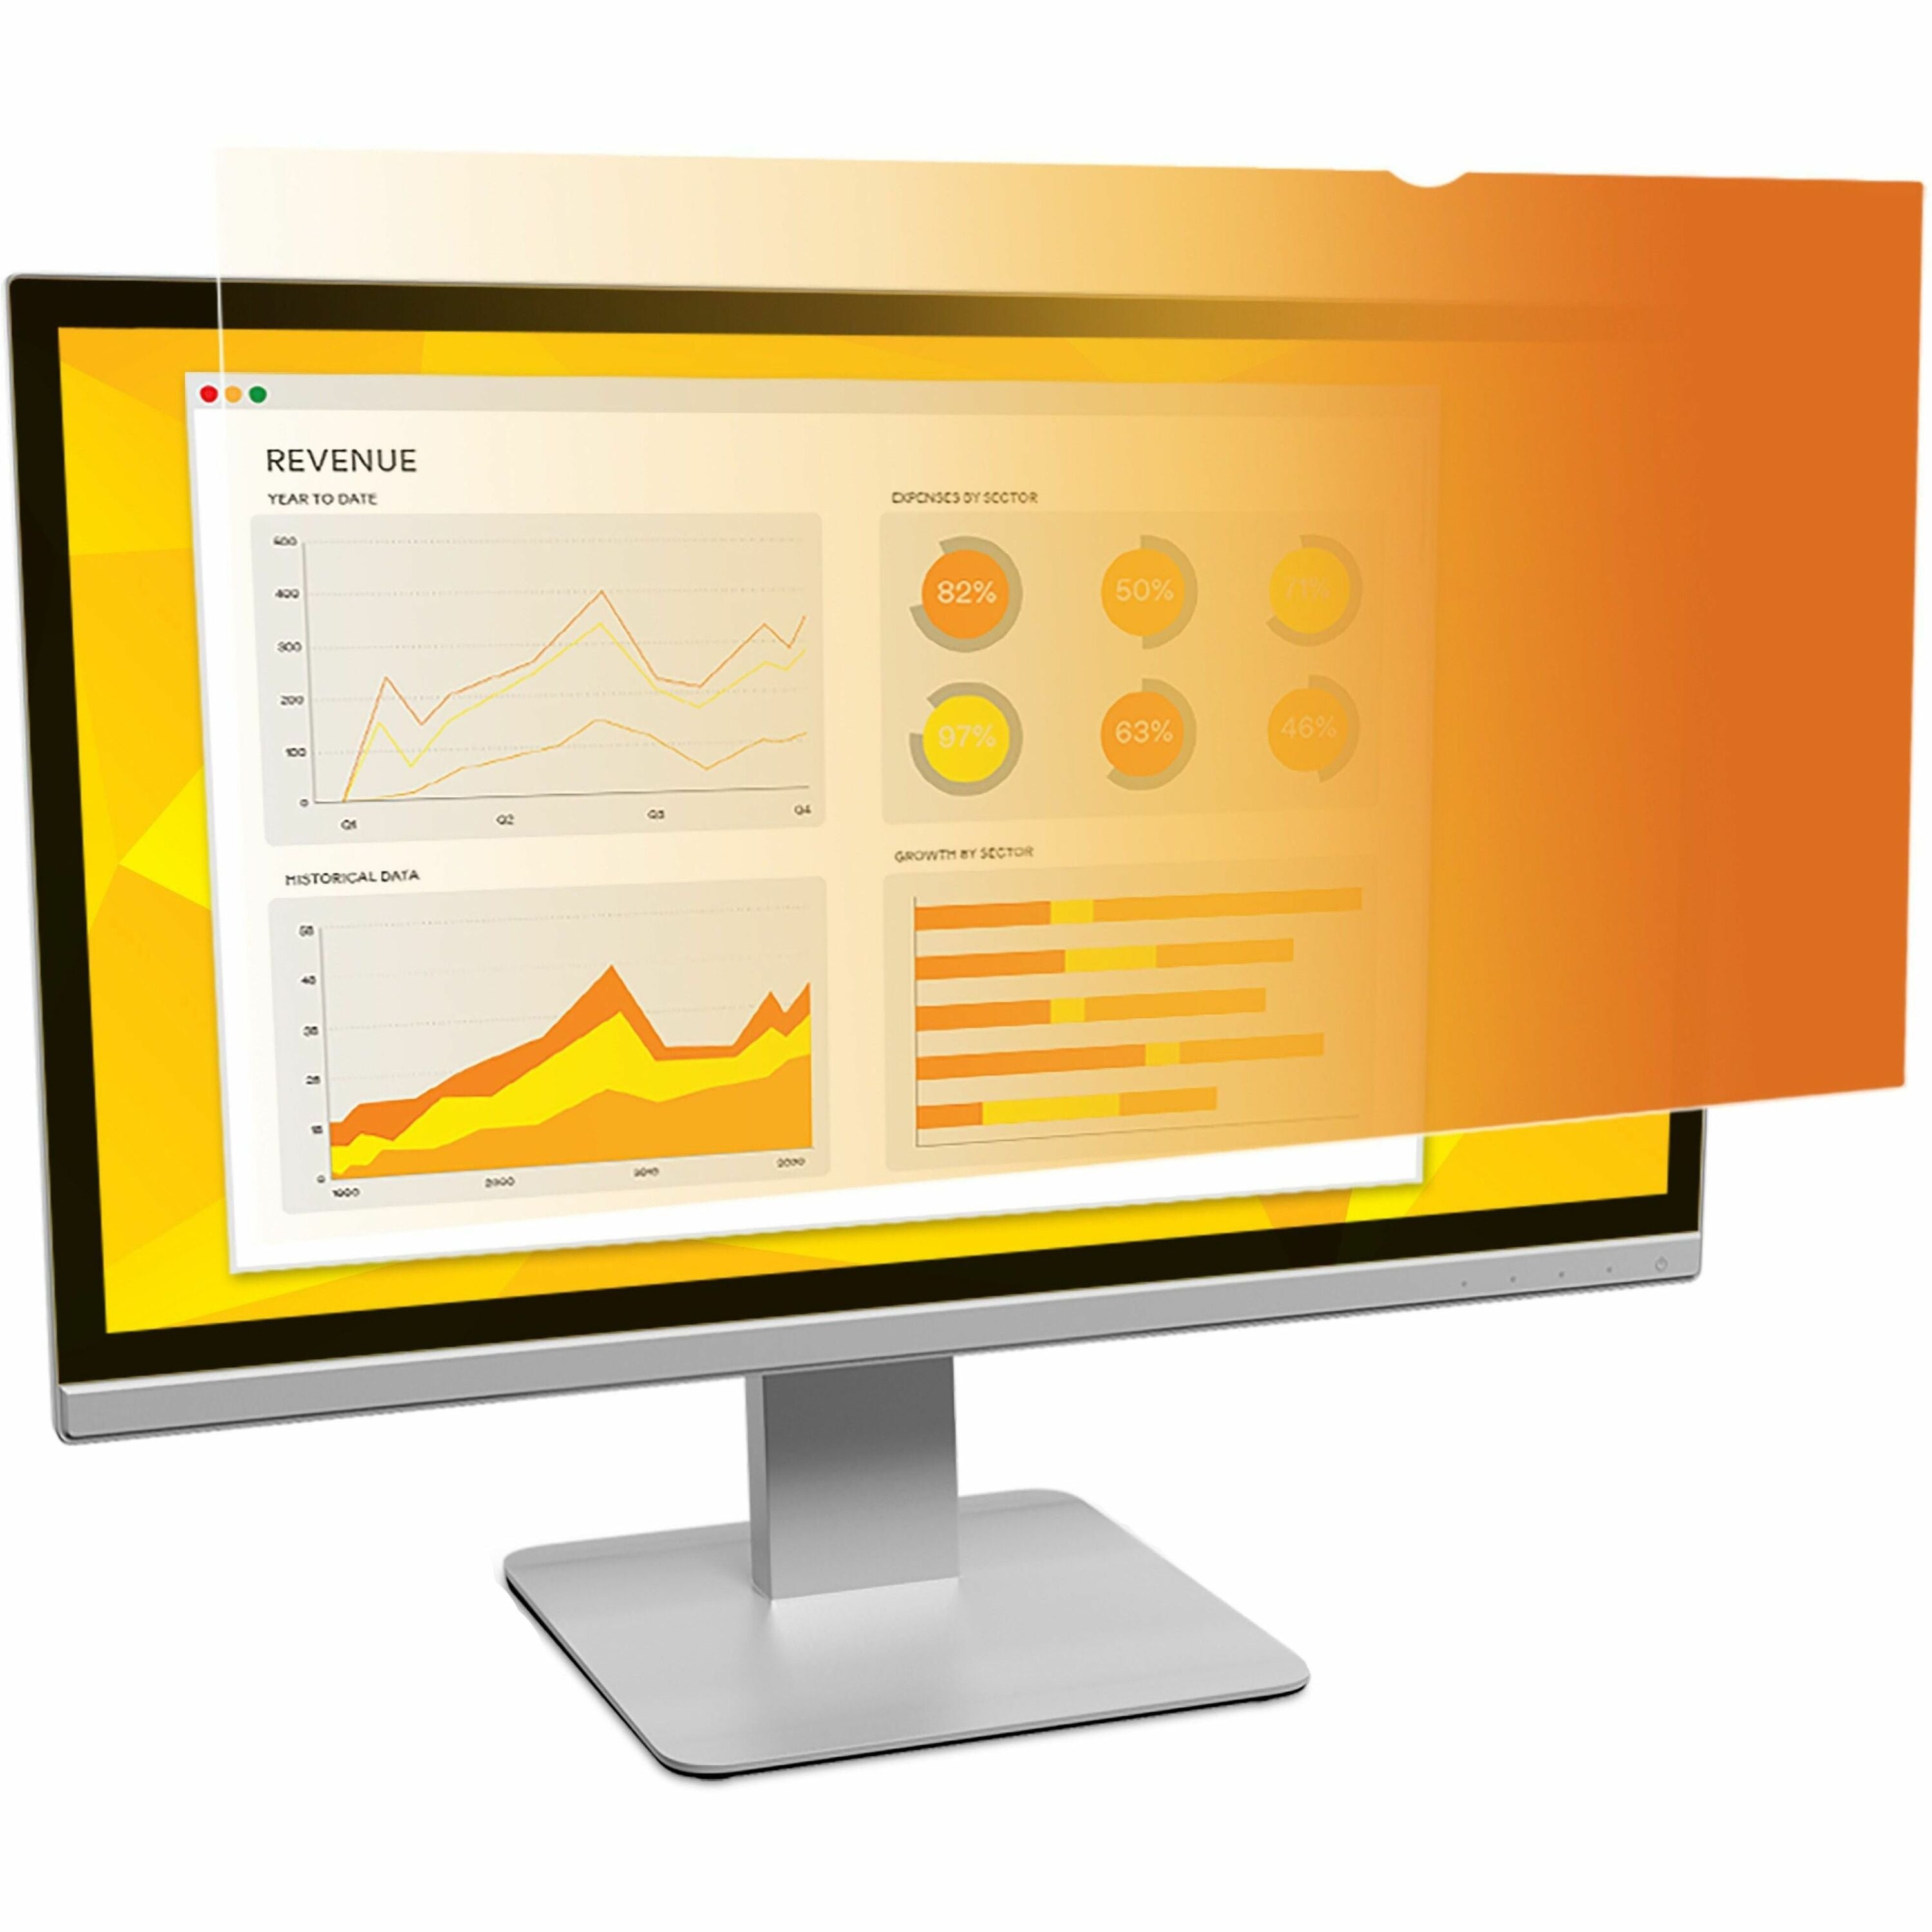 3m-gold-privacy-filter-for-236in-monitor-169-gf236w9b-for-236-widescreen-lcd-monitor-169-scratch-resistant-dust-resistant_mmmgf236w9b - 1